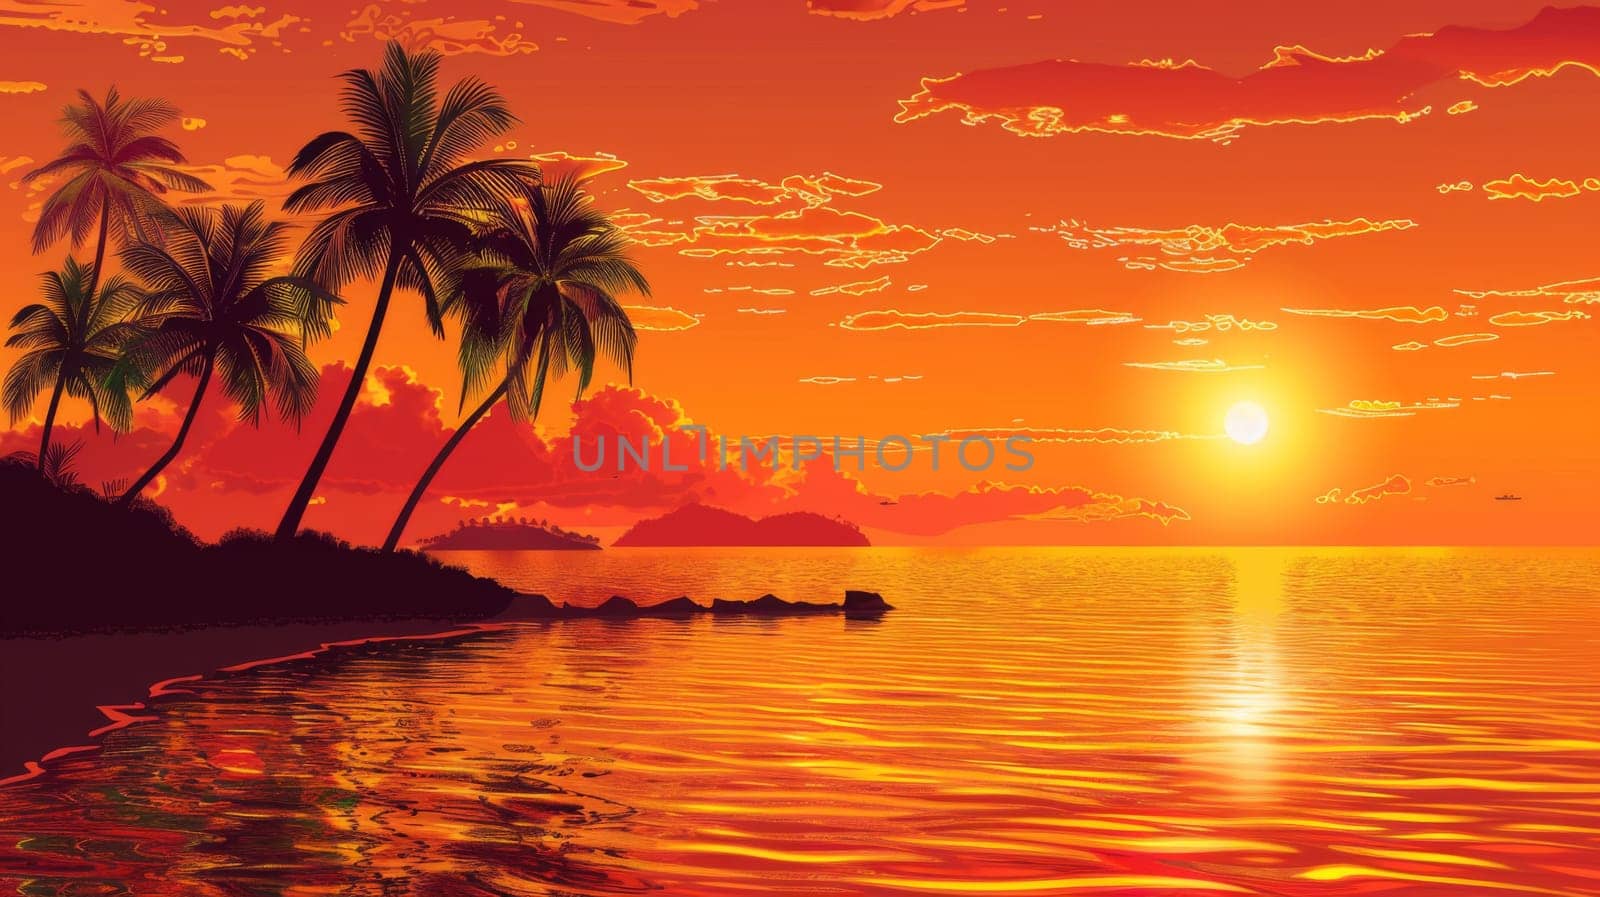 A sunset over the ocean with palm trees and a boat